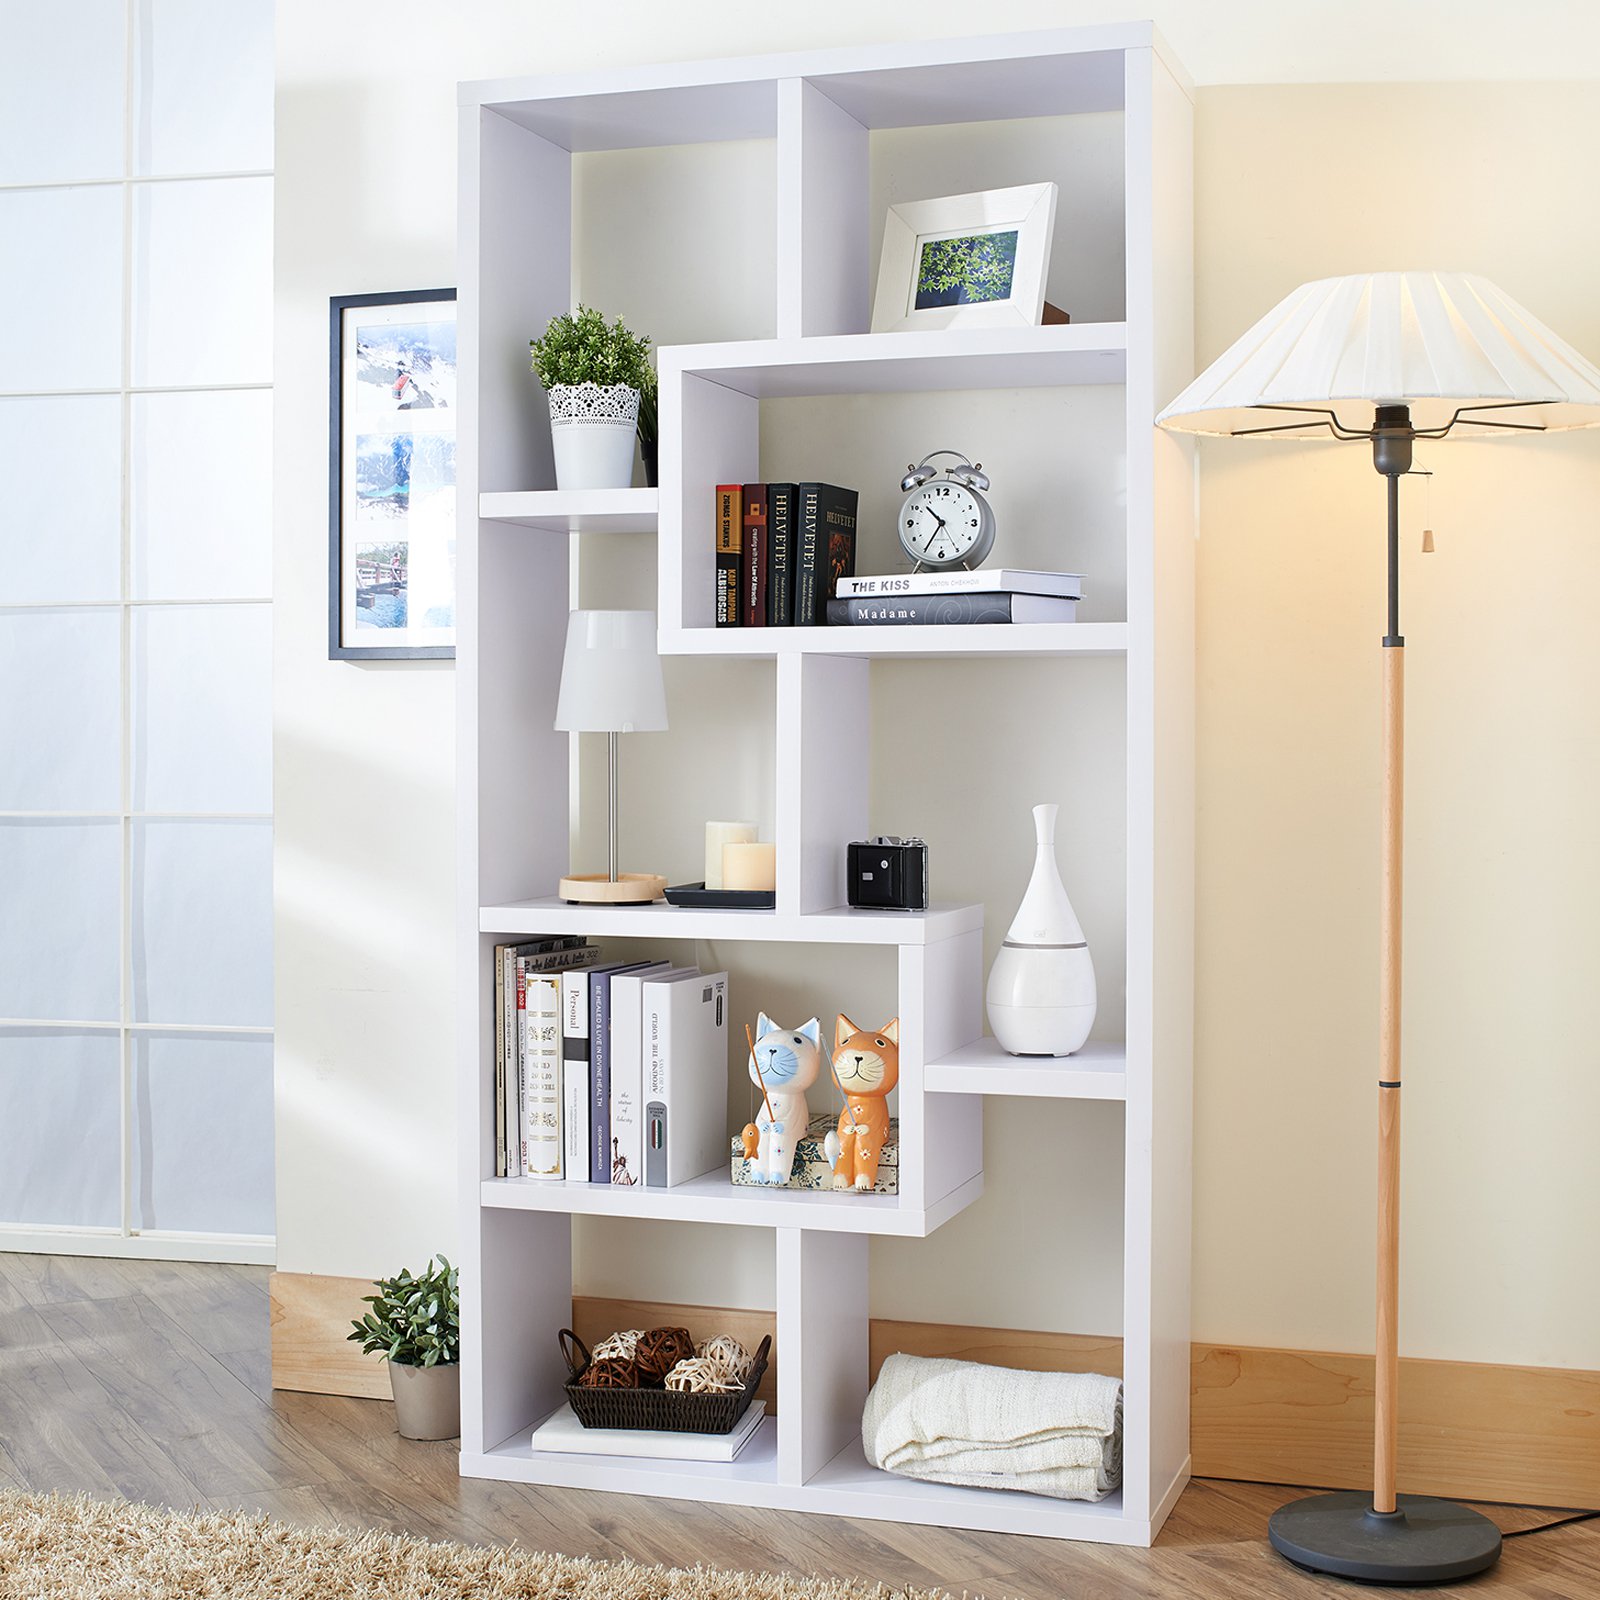 Chic Outstanding Modern White Bookcase Pics Decoration Inspiration ... modern white bookshelf